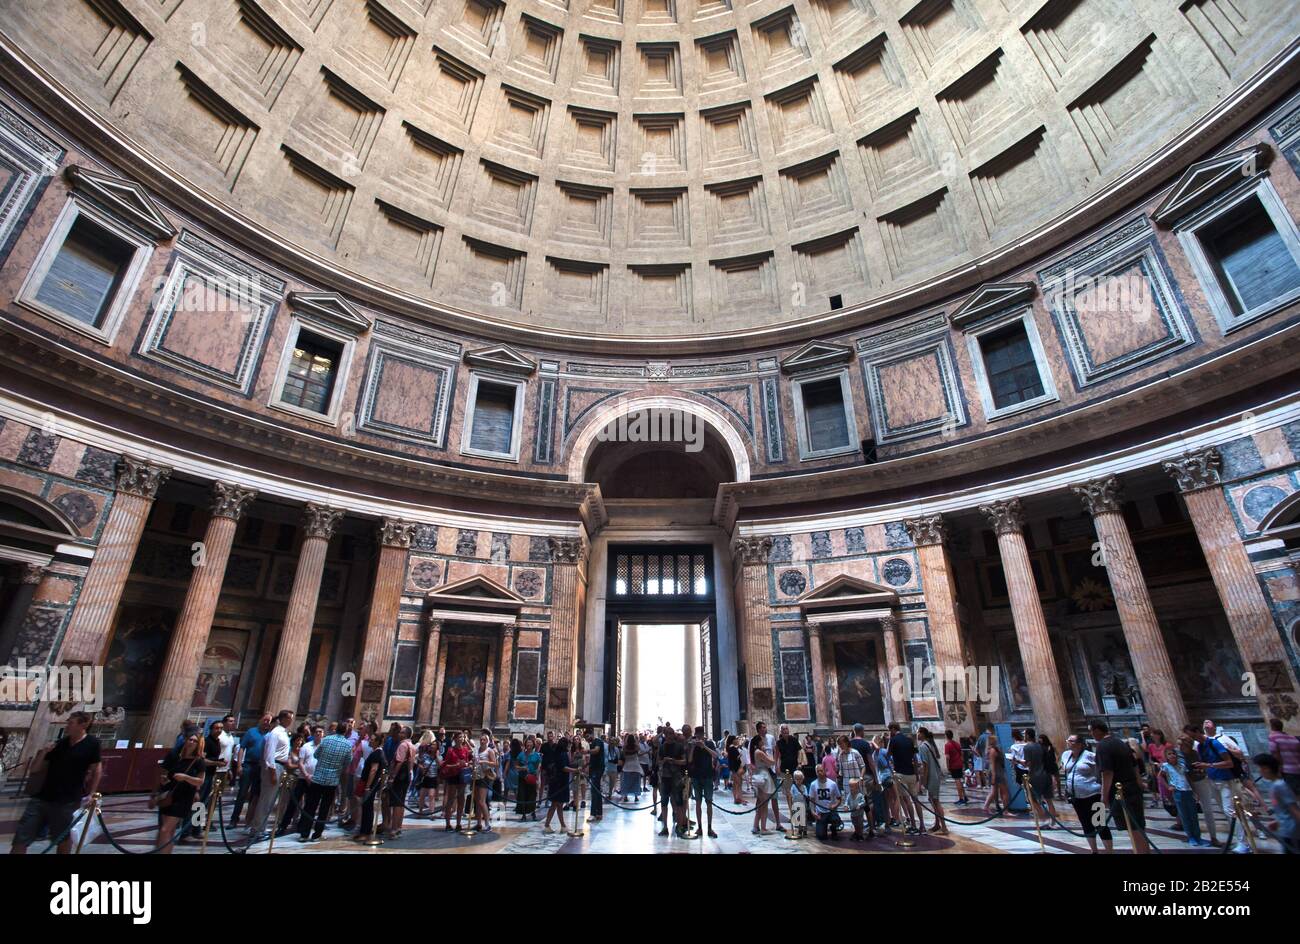 Wide angle shot of the interior of the Pantheon building in Rome Stock Photo